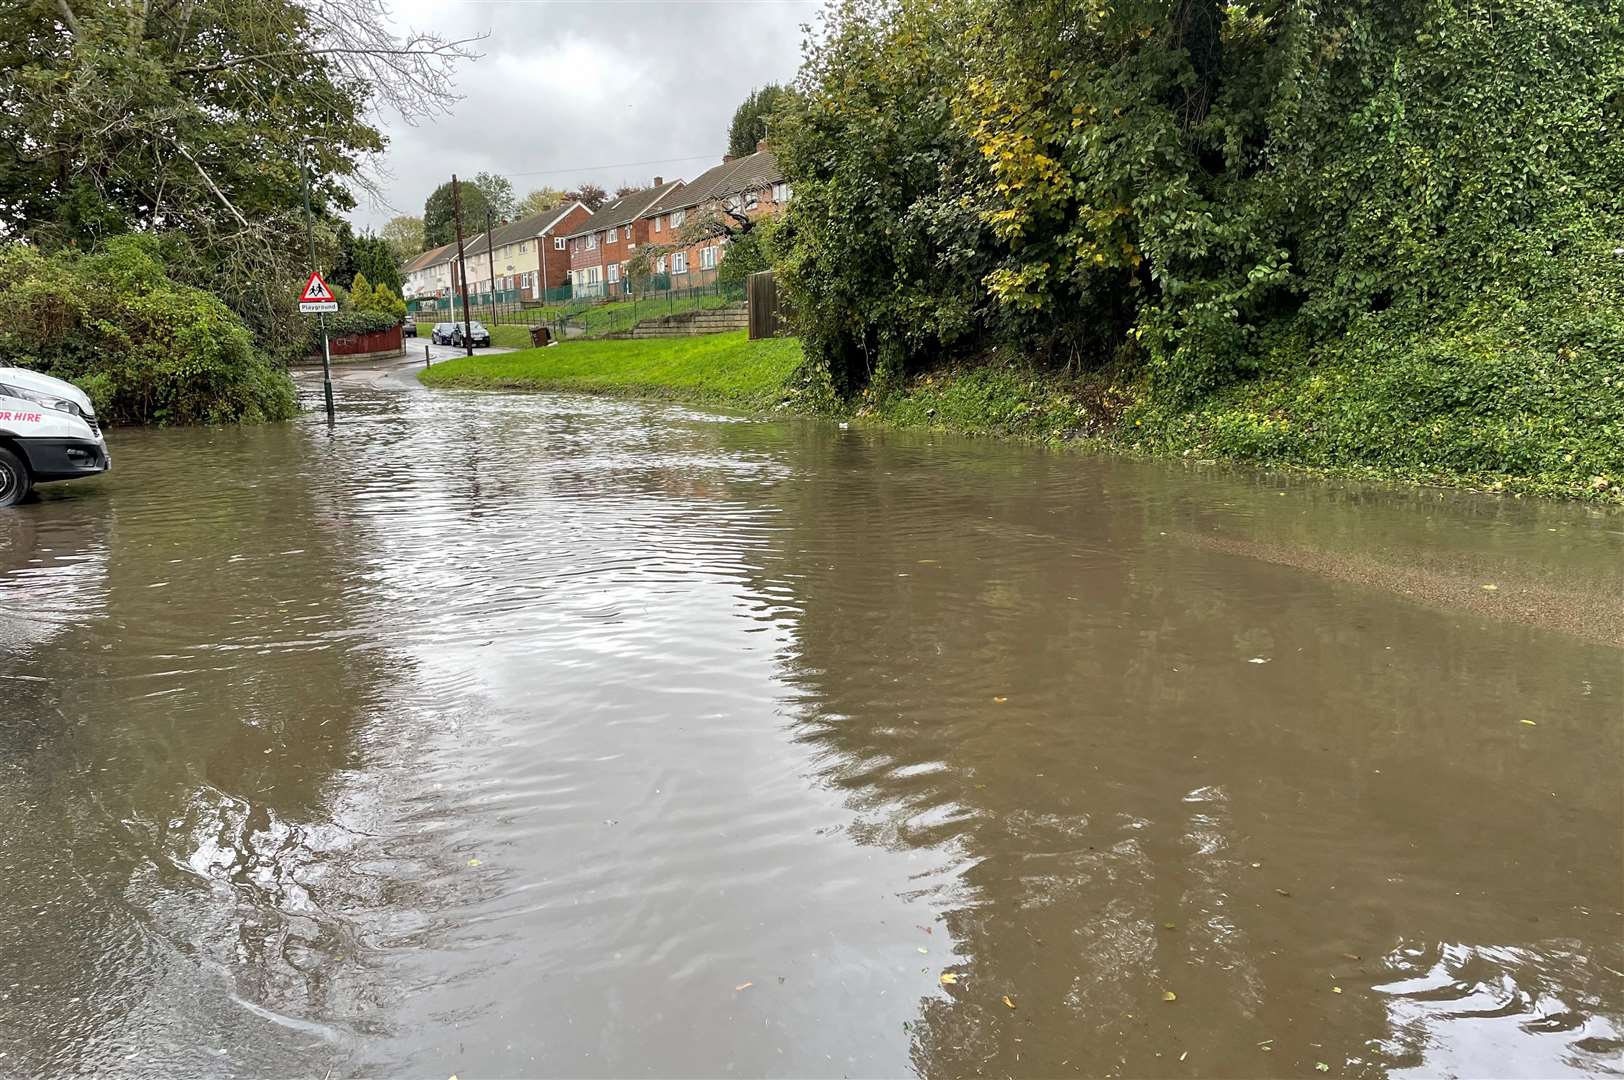 Pilgrims Way in Strood is also flooded